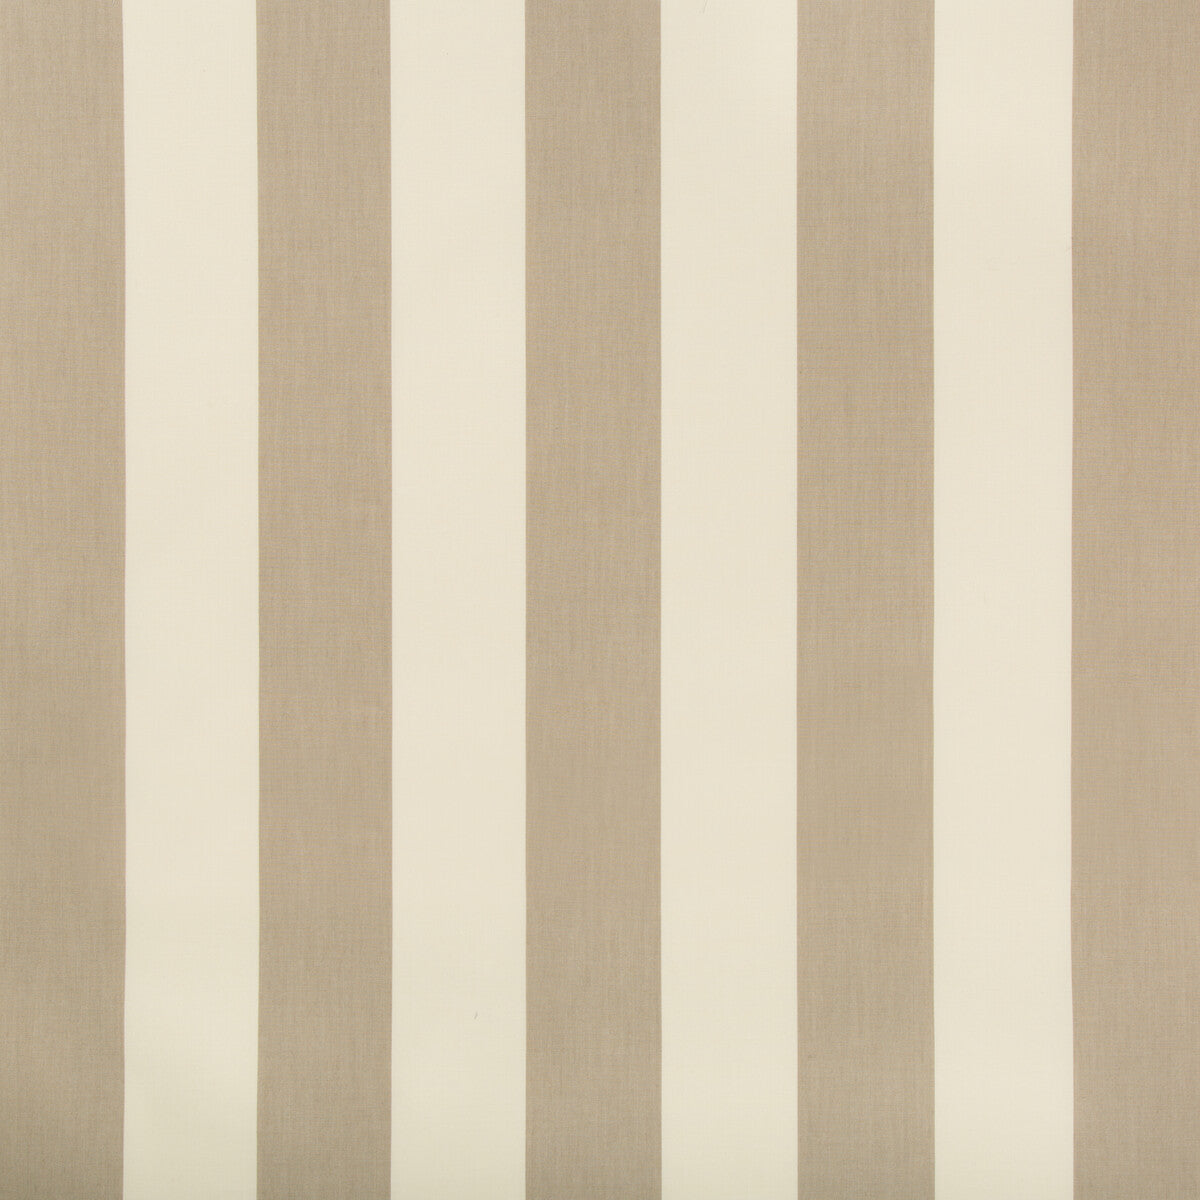 Kravet Basics fabric in 35373-106 color - pattern 35373.106.0 - by Kravet Basics in the Performance Indoor Outdoor collection